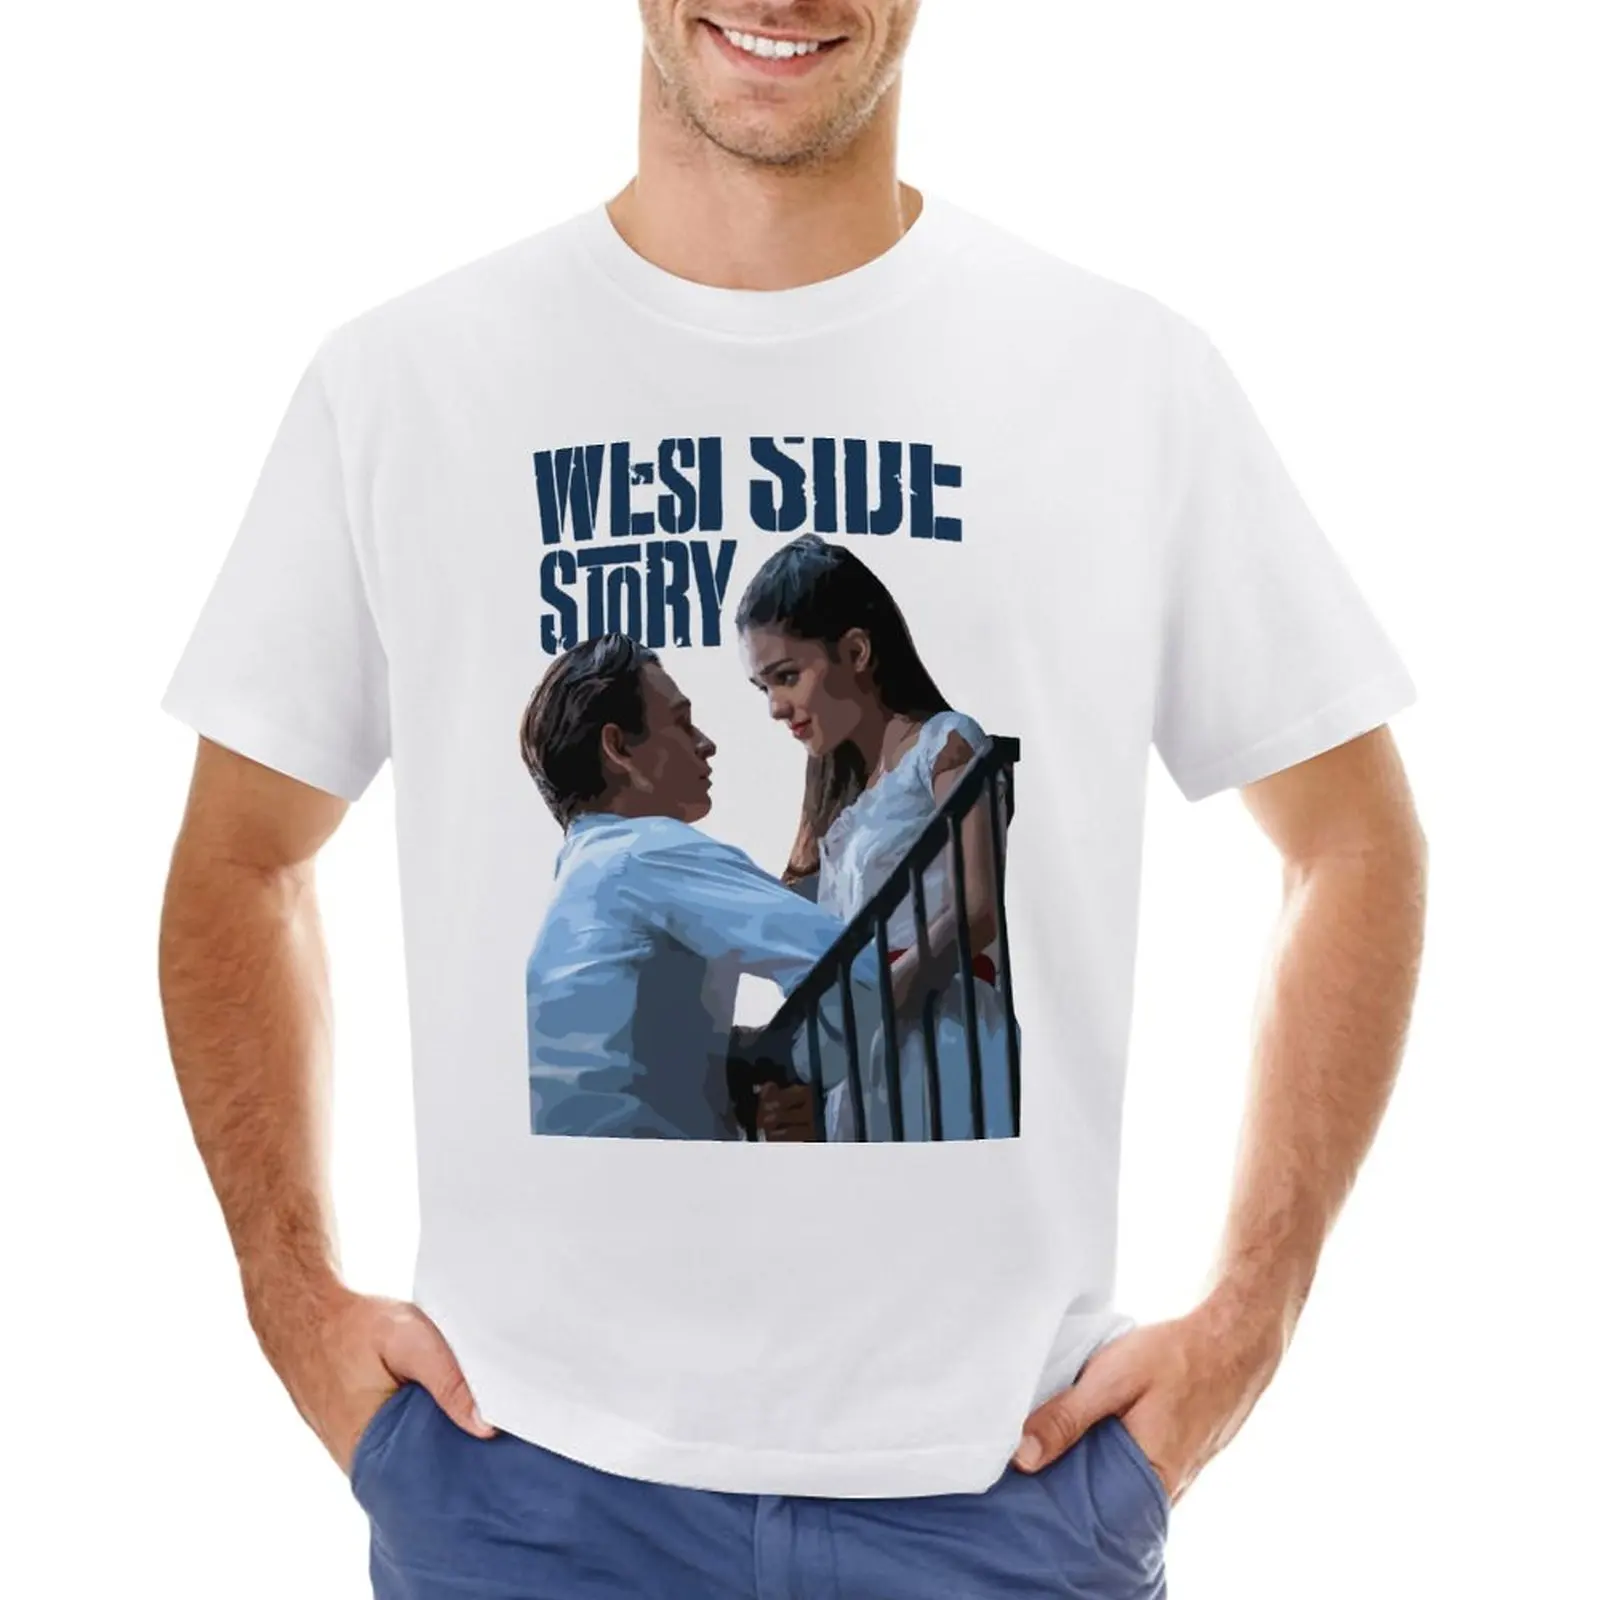 

West Side Story 2021 T-Shirt vintage clothes cute tops plain animal prinfor boys mens t shirt graphic